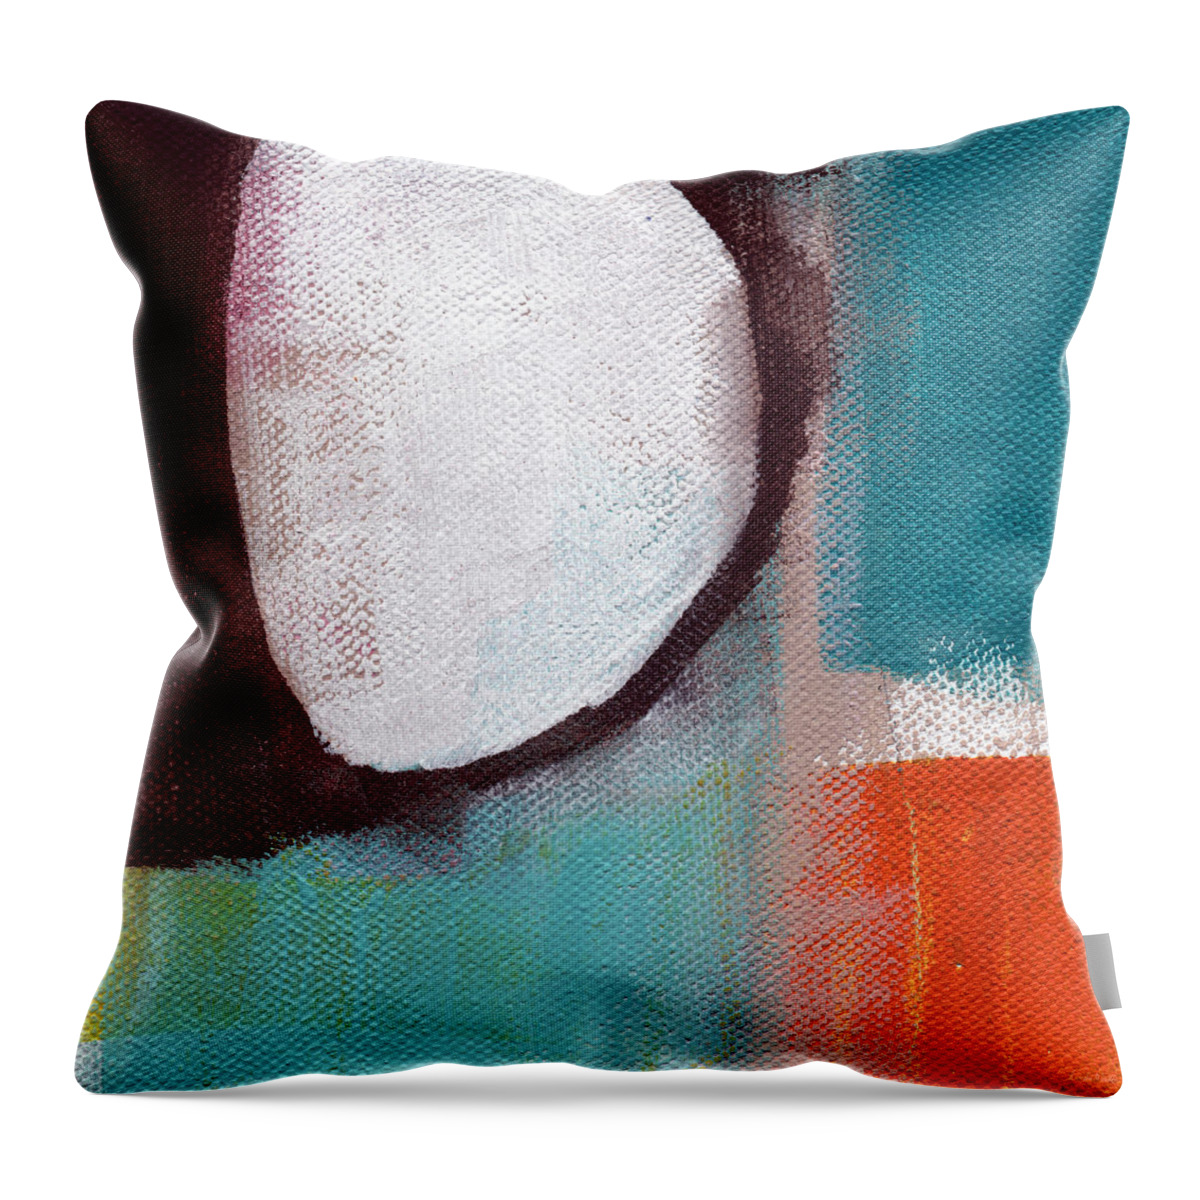 Teal Throw Pillow featuring the painting Where I Belong by Linda Woods